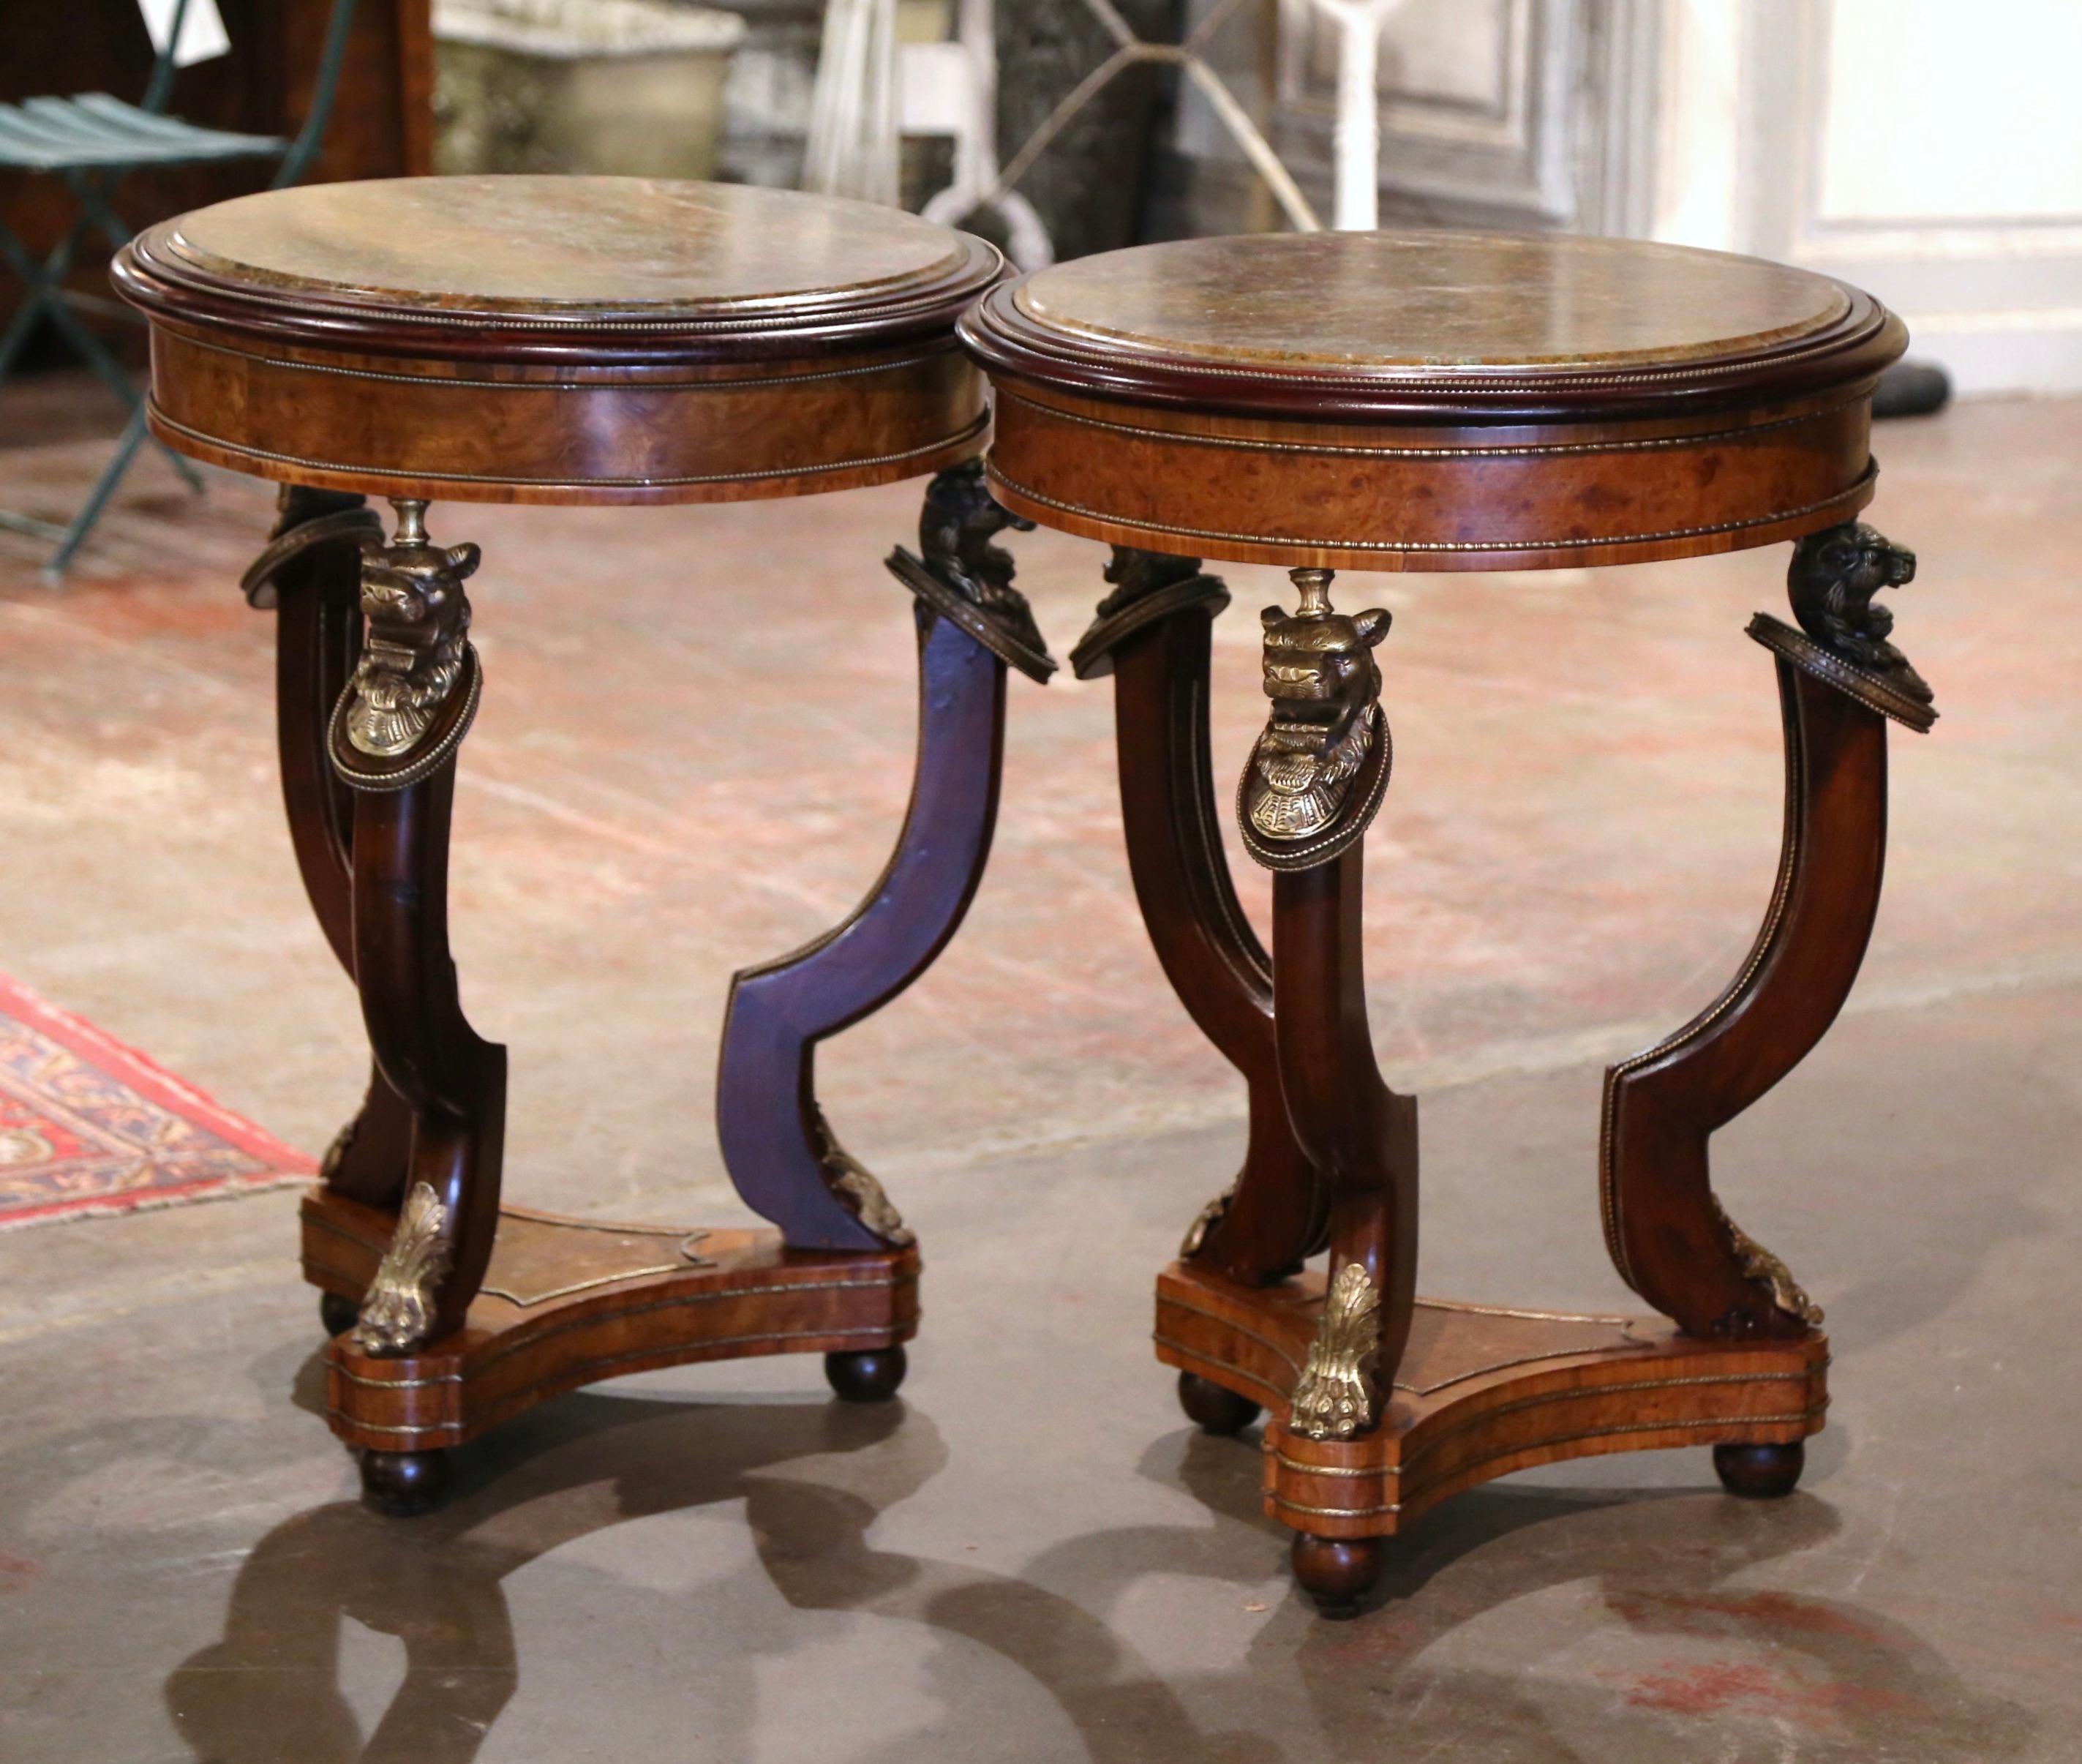 Pair of 19th Century French Marble Top Carved Burl Walnut Gueridon Tables For Sale 4